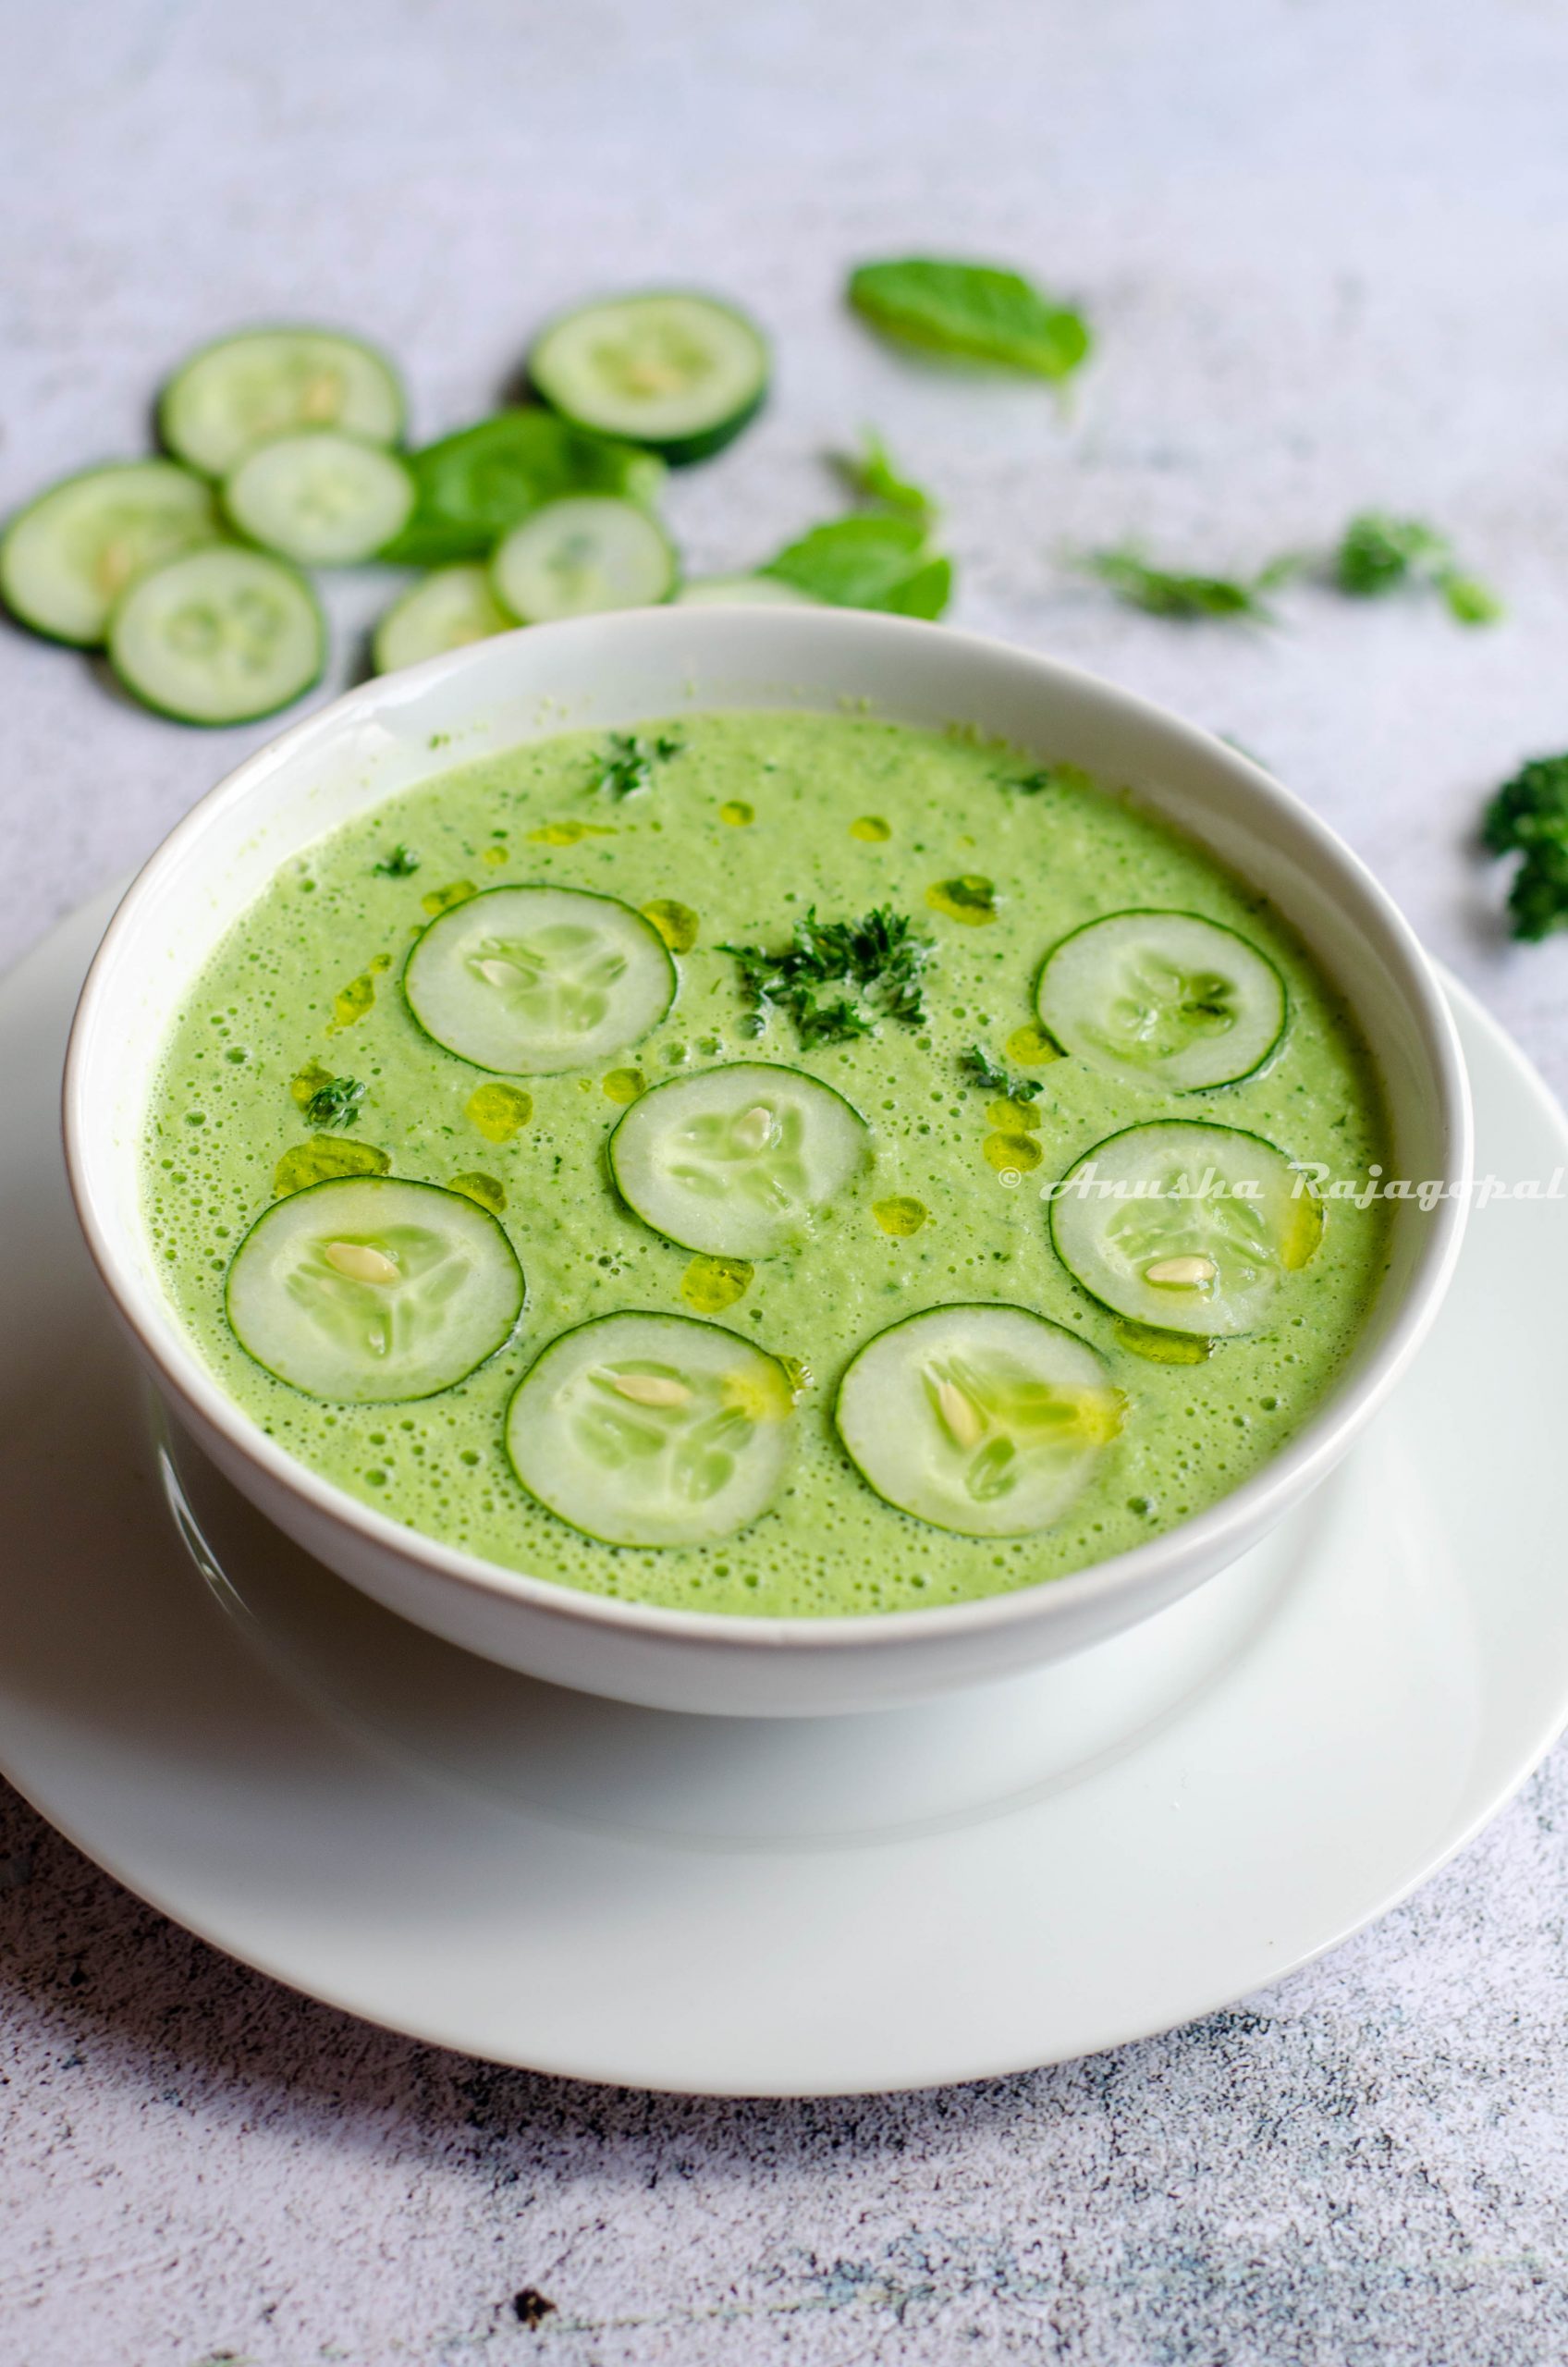 cucumber gazpacho topped with cucumber slices and herbs served in a white bowl set against a white background